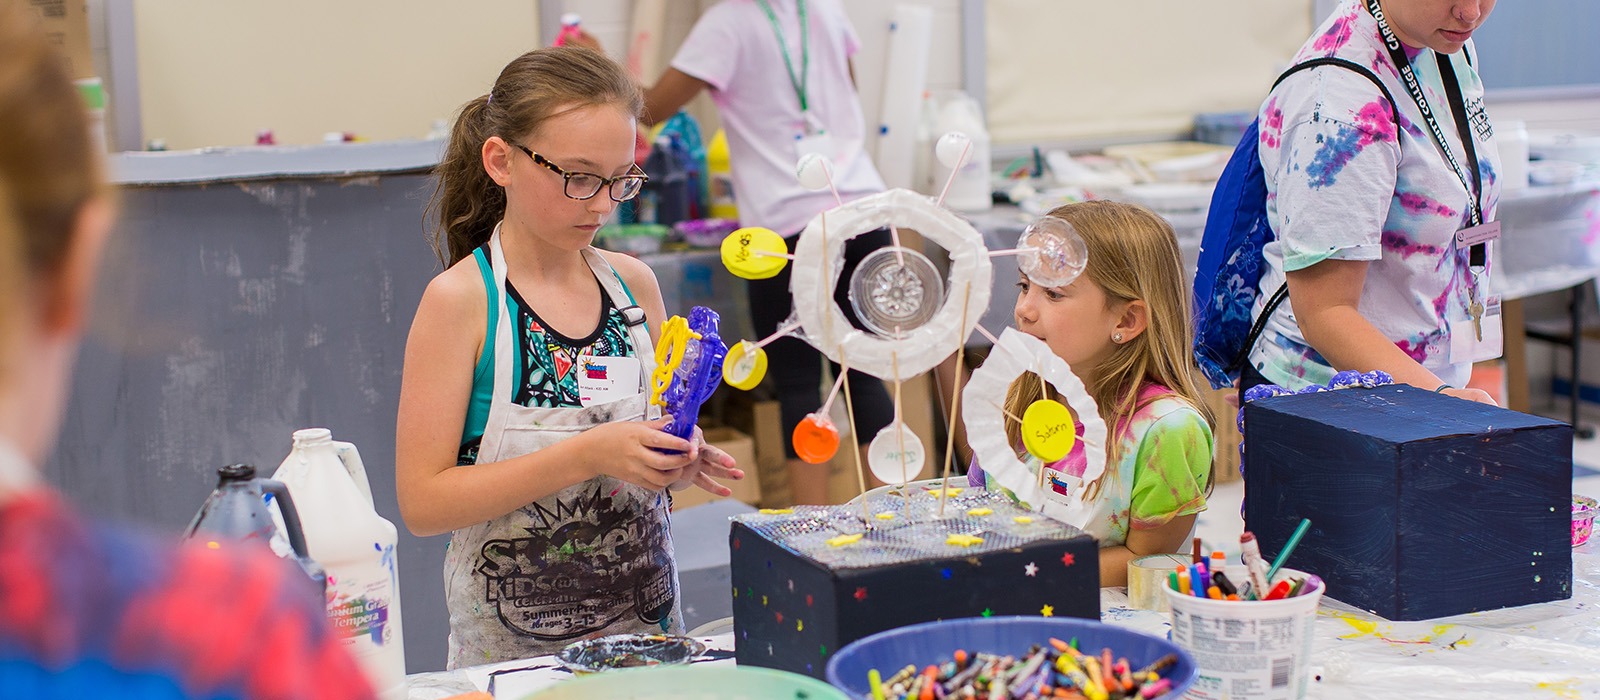 Two girls participating in a craft activity.